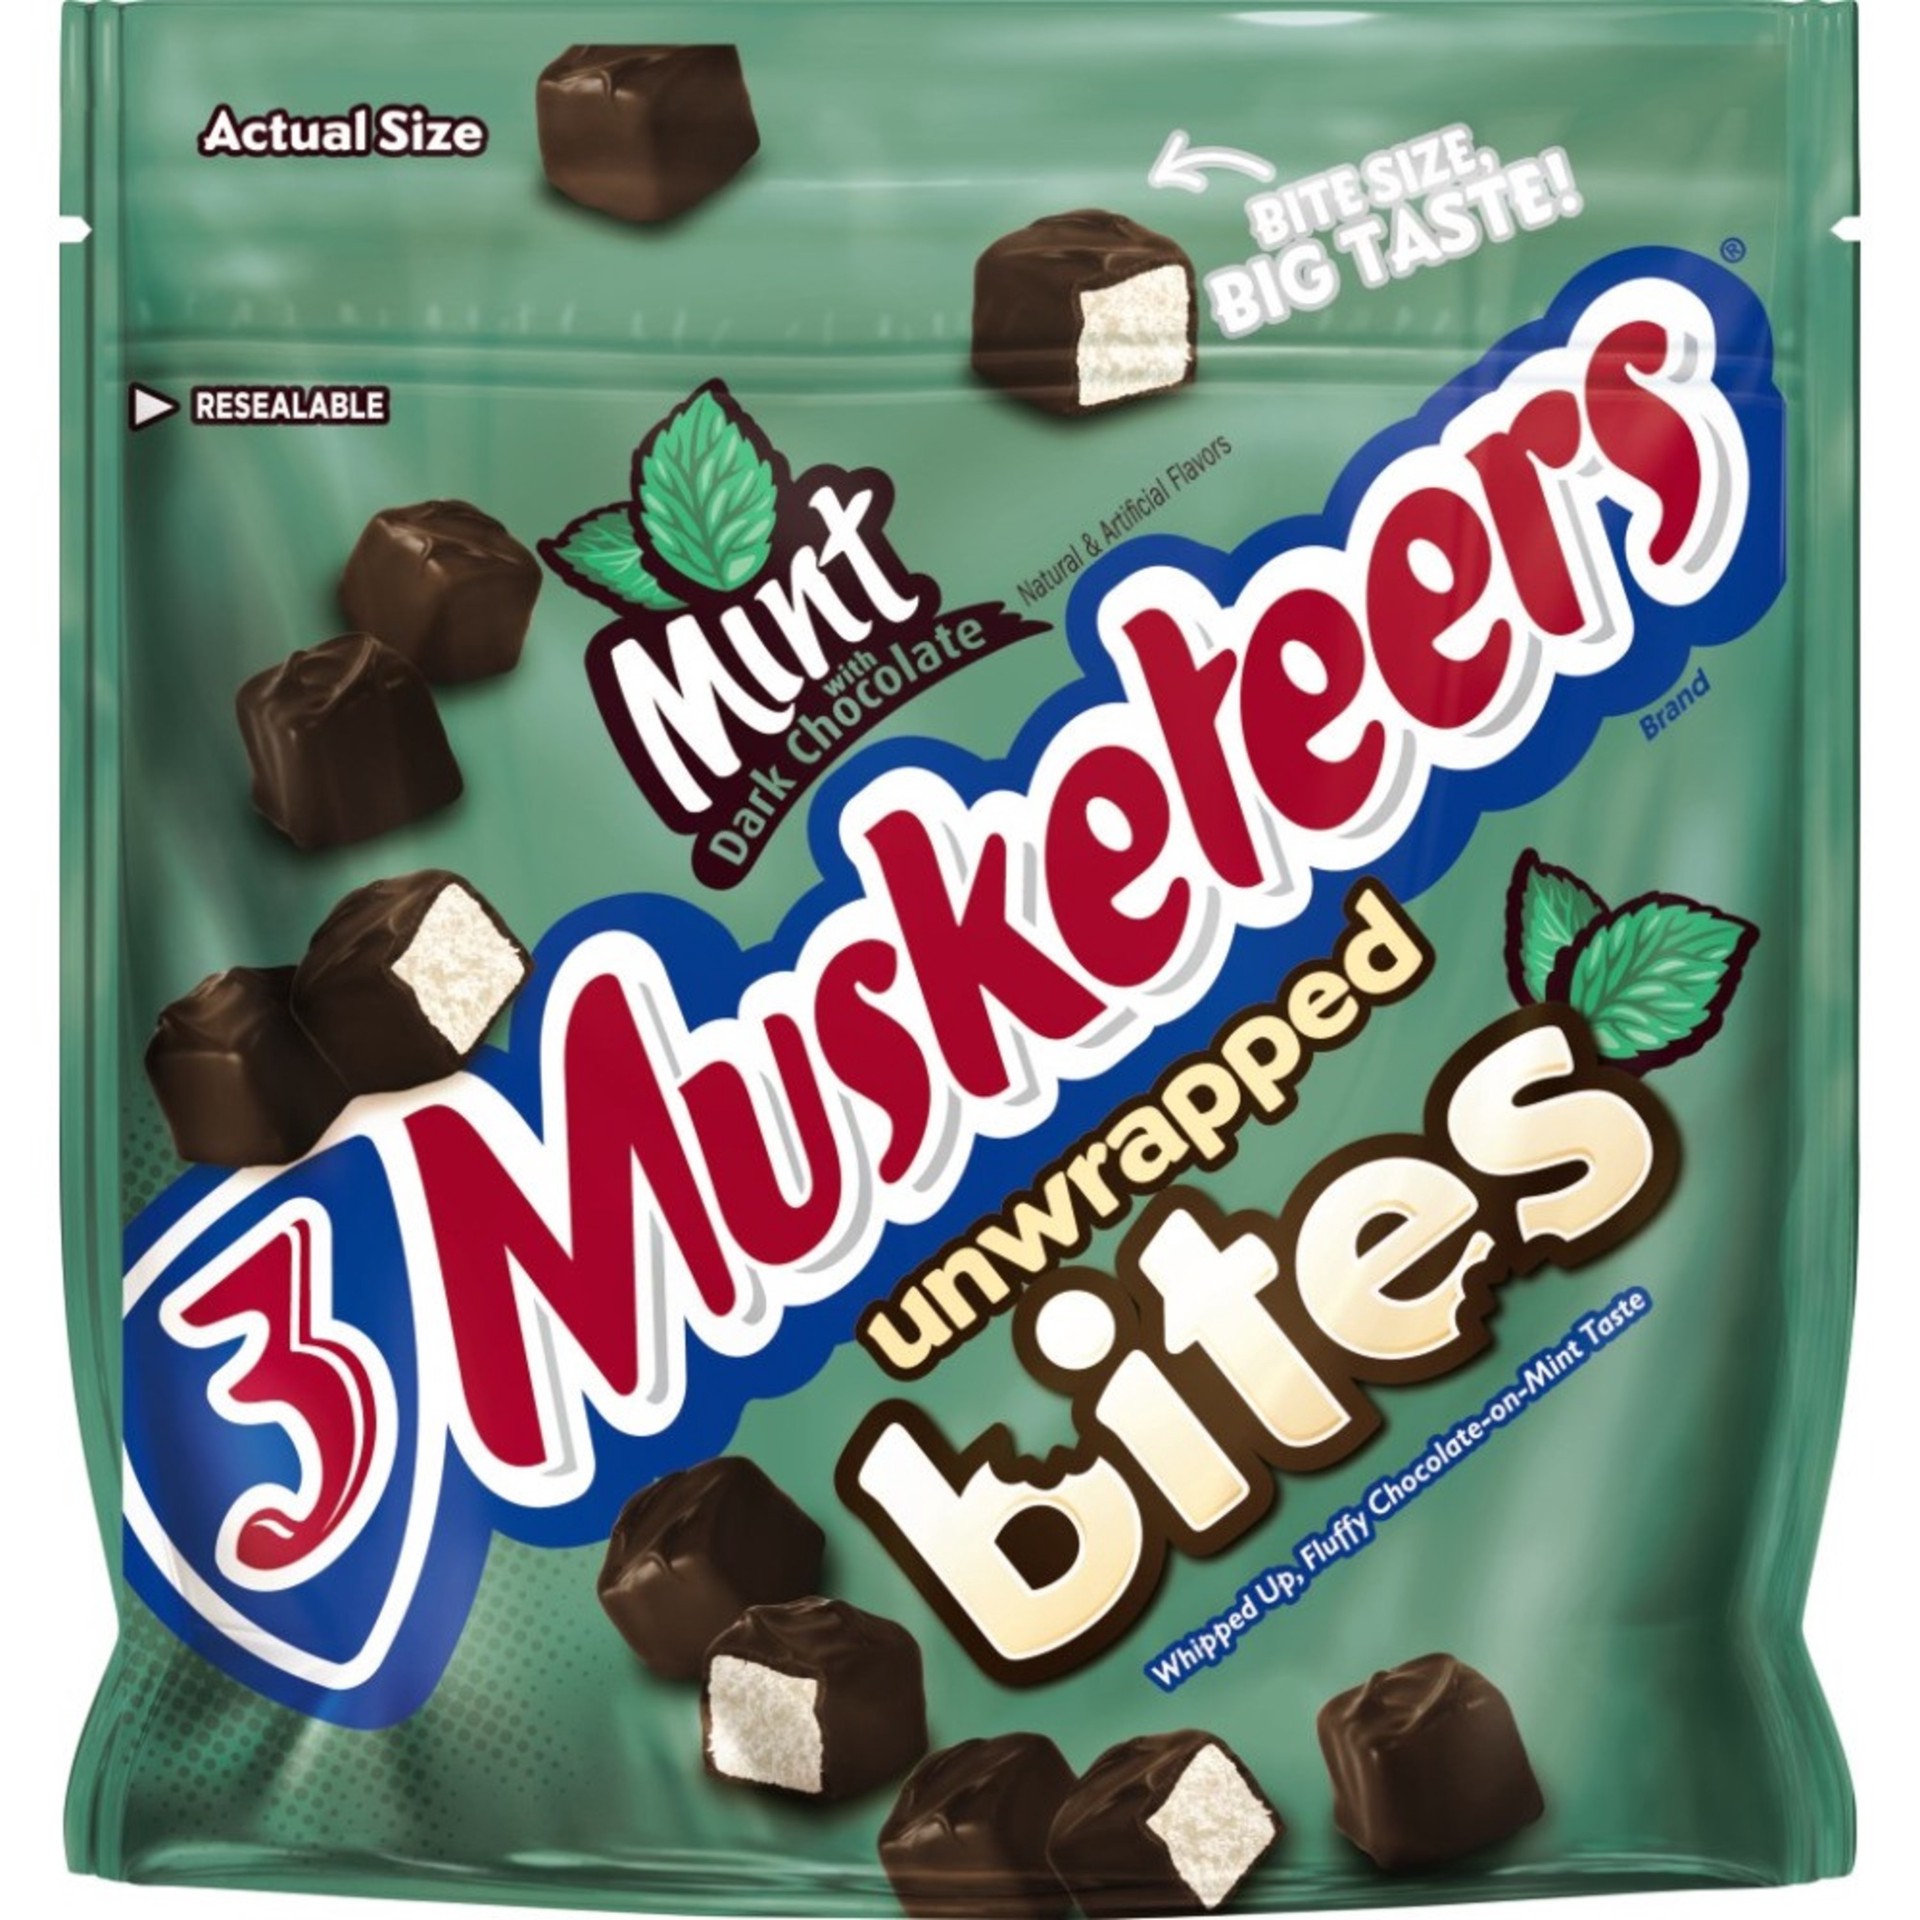 slide 1 of 1, 3 MUSKETEERS Candy, Mint, with Dark Chocolate, 6 oz